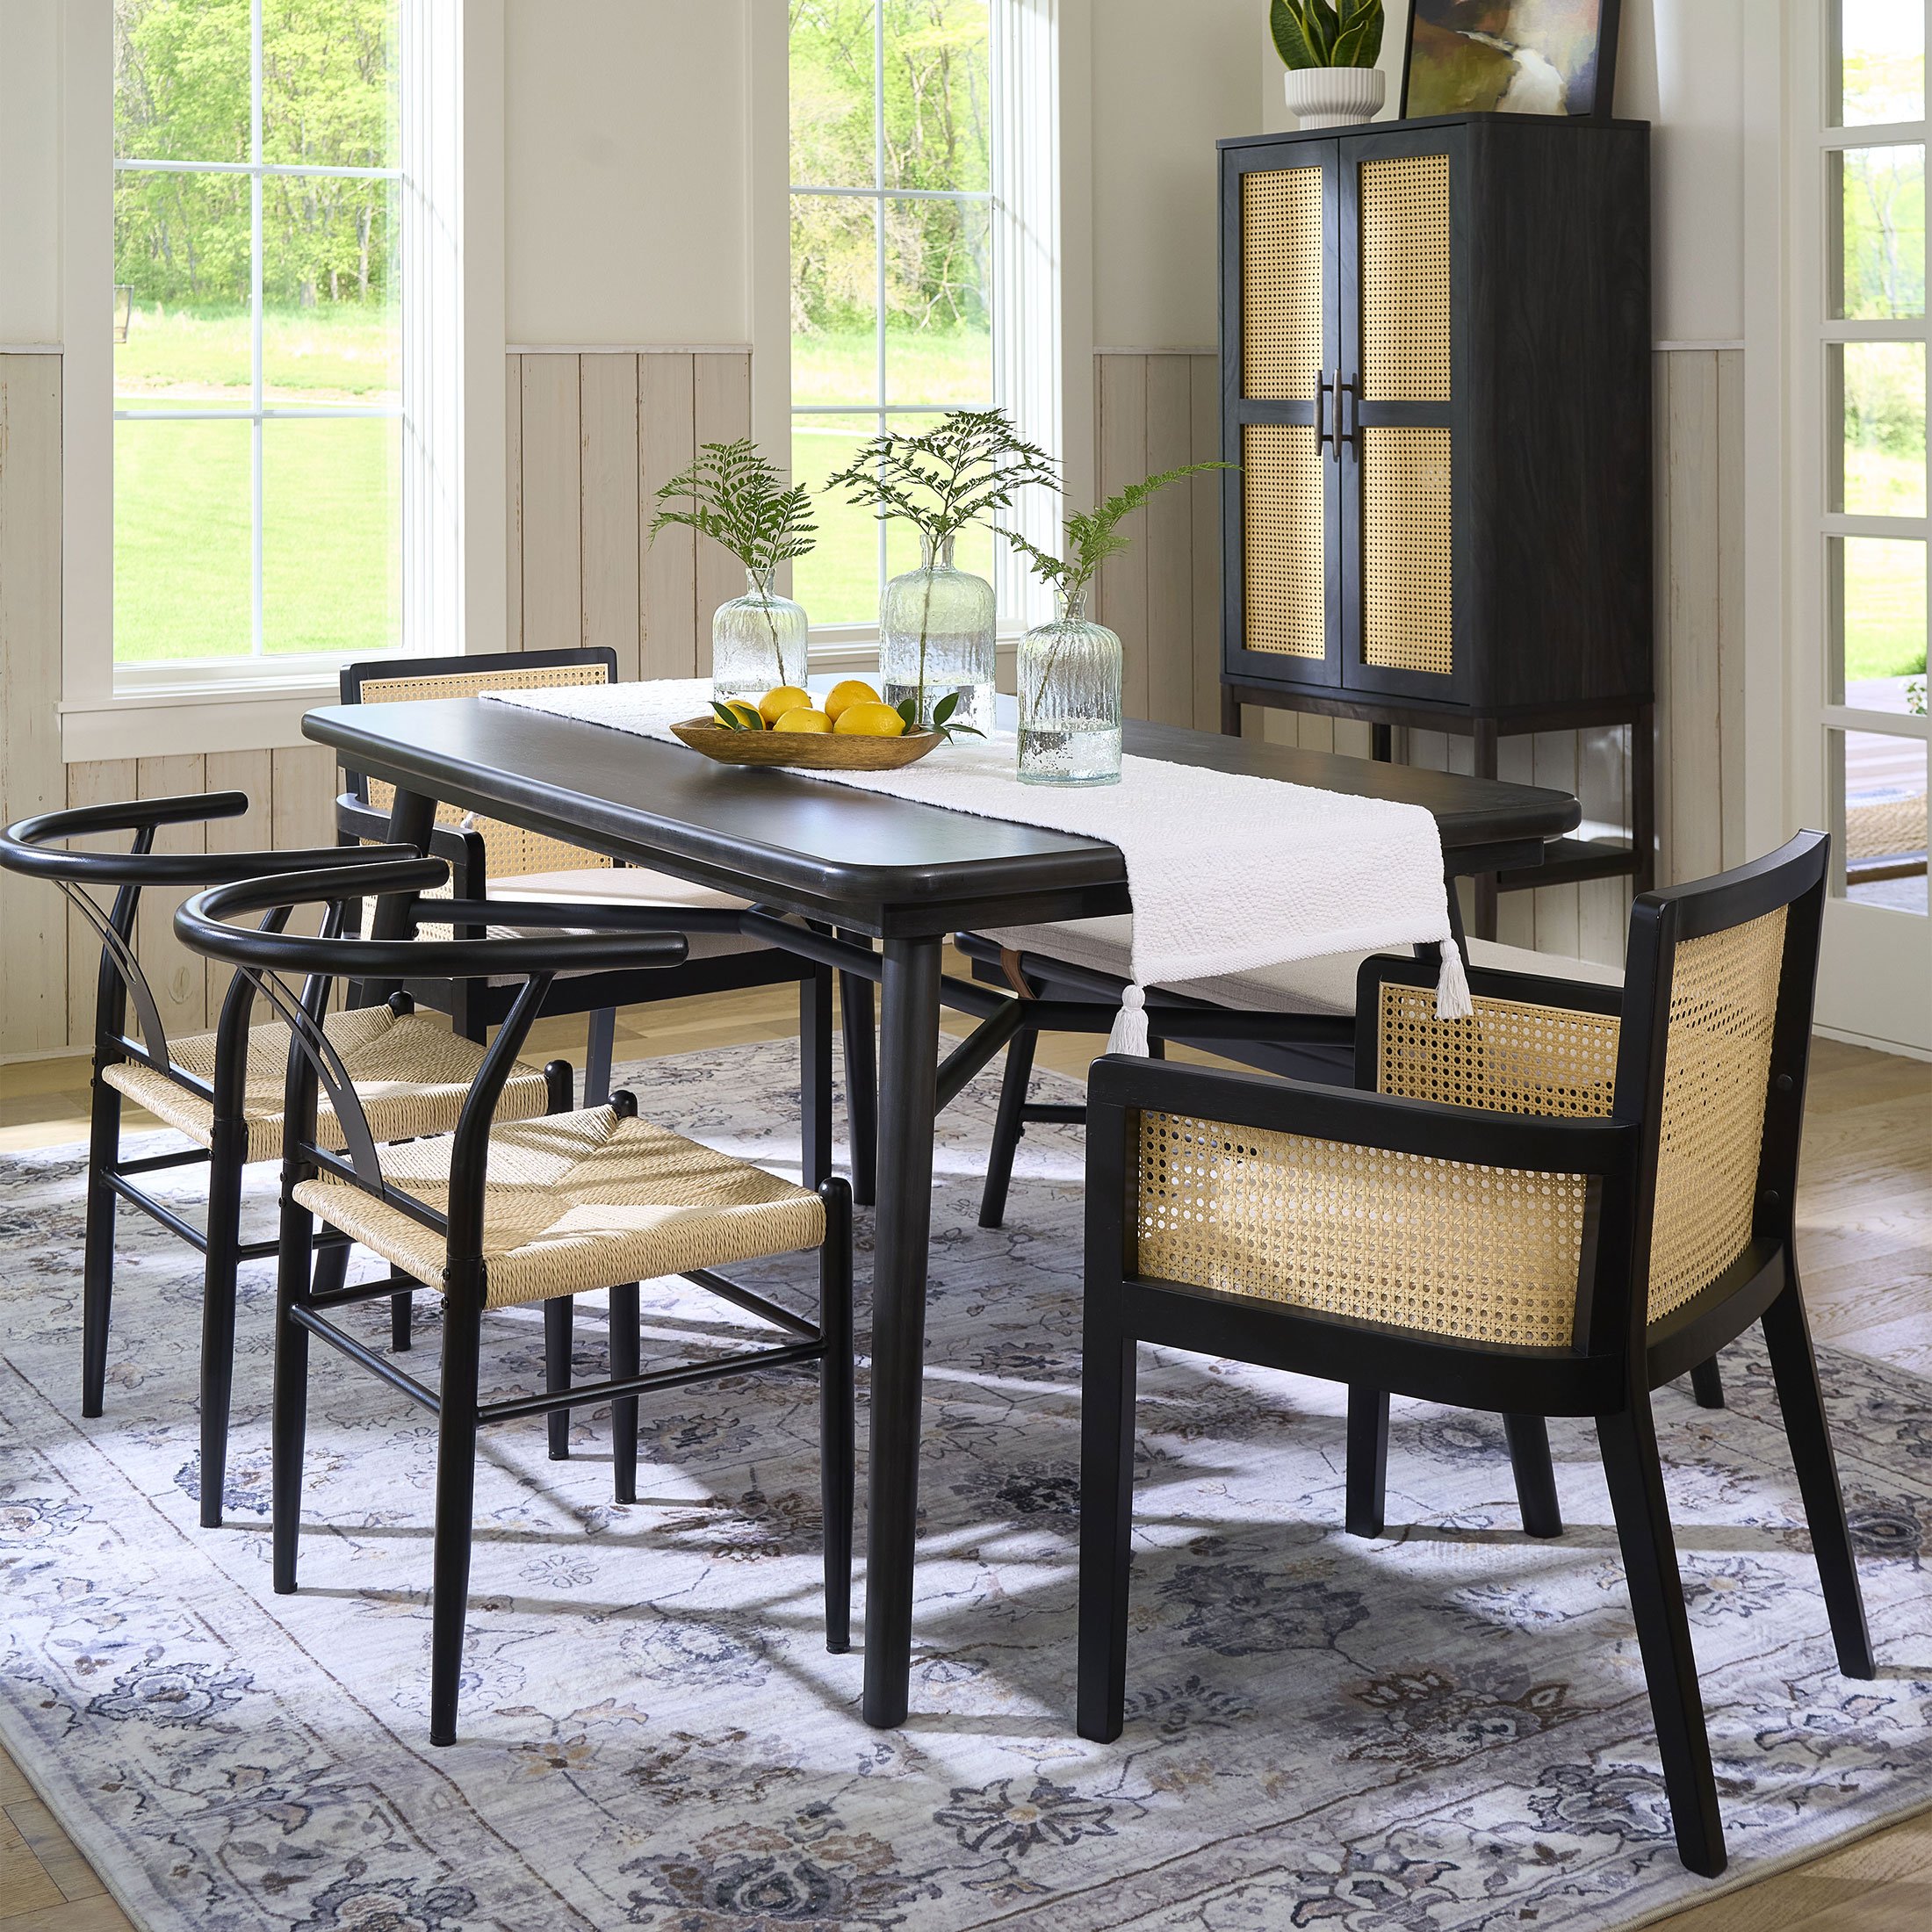 Better Homes & Gardens Springwood Dining Table, Charcoal - image 3 of 15